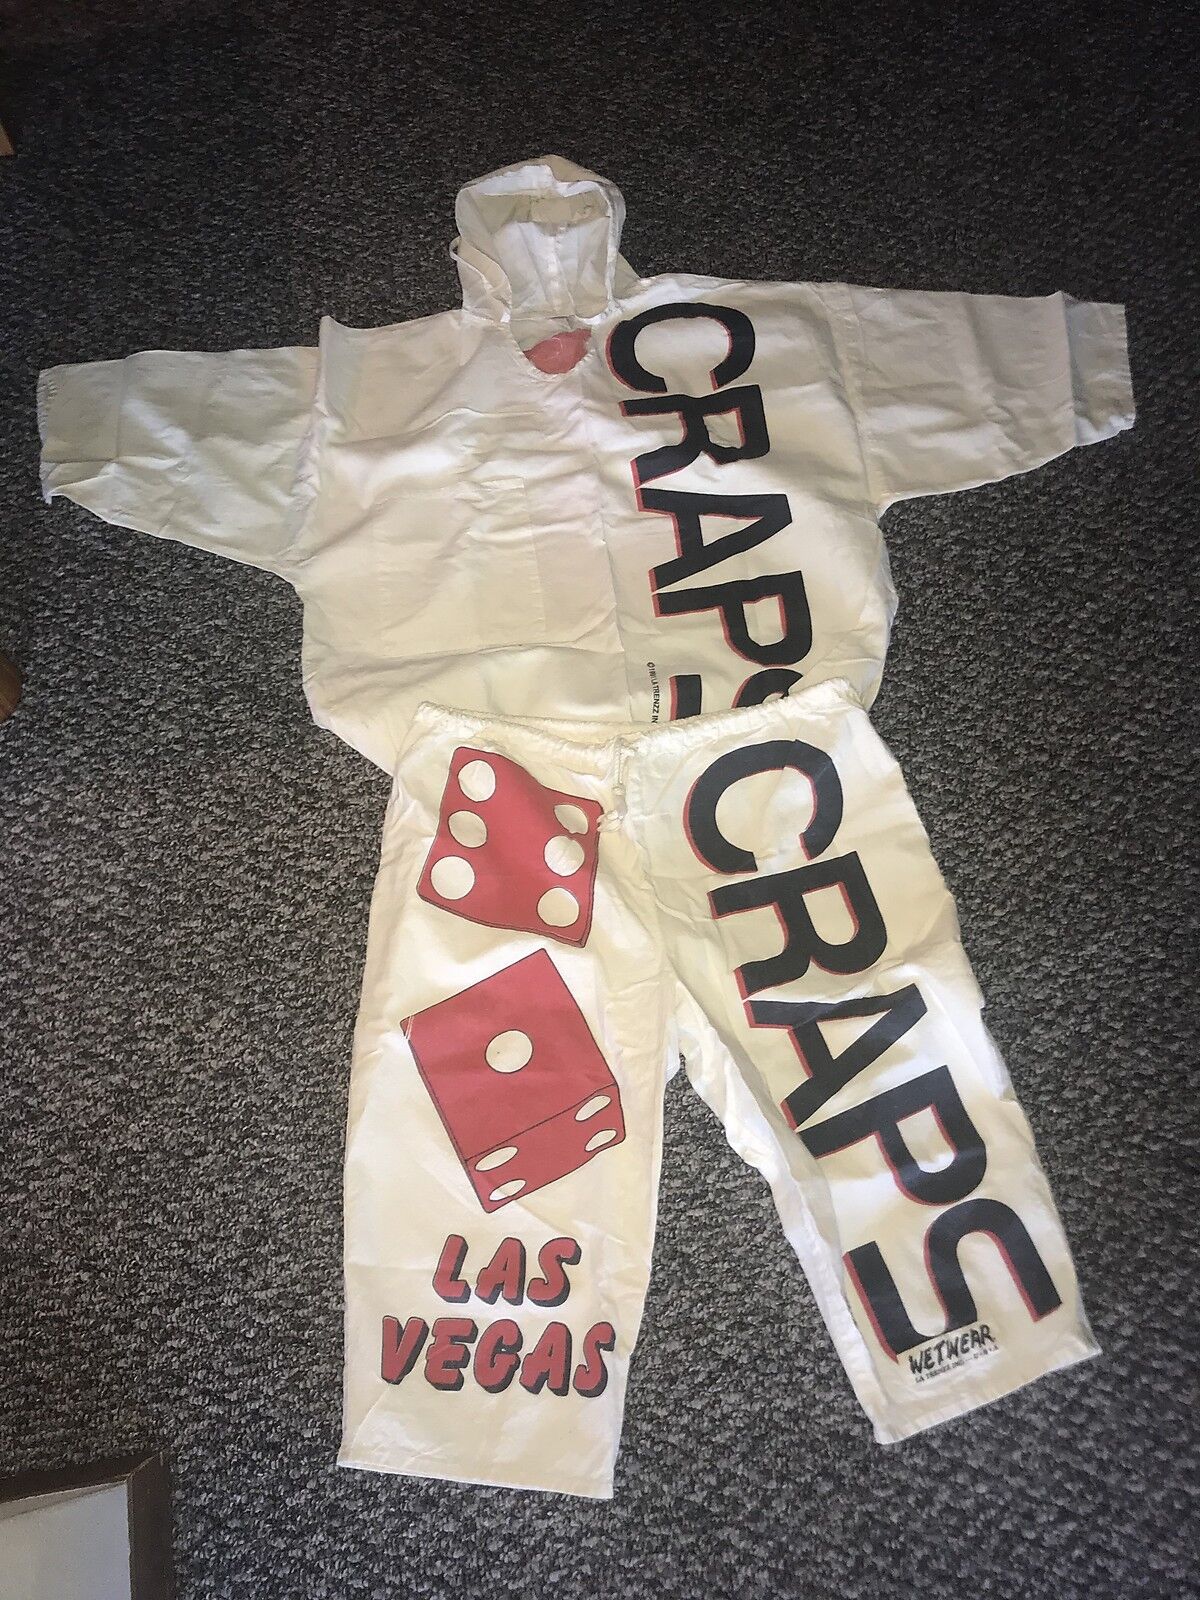 Craps Dice Hooded Top & Pants Outfit Halloween Or Convention? Las Vegas 1991